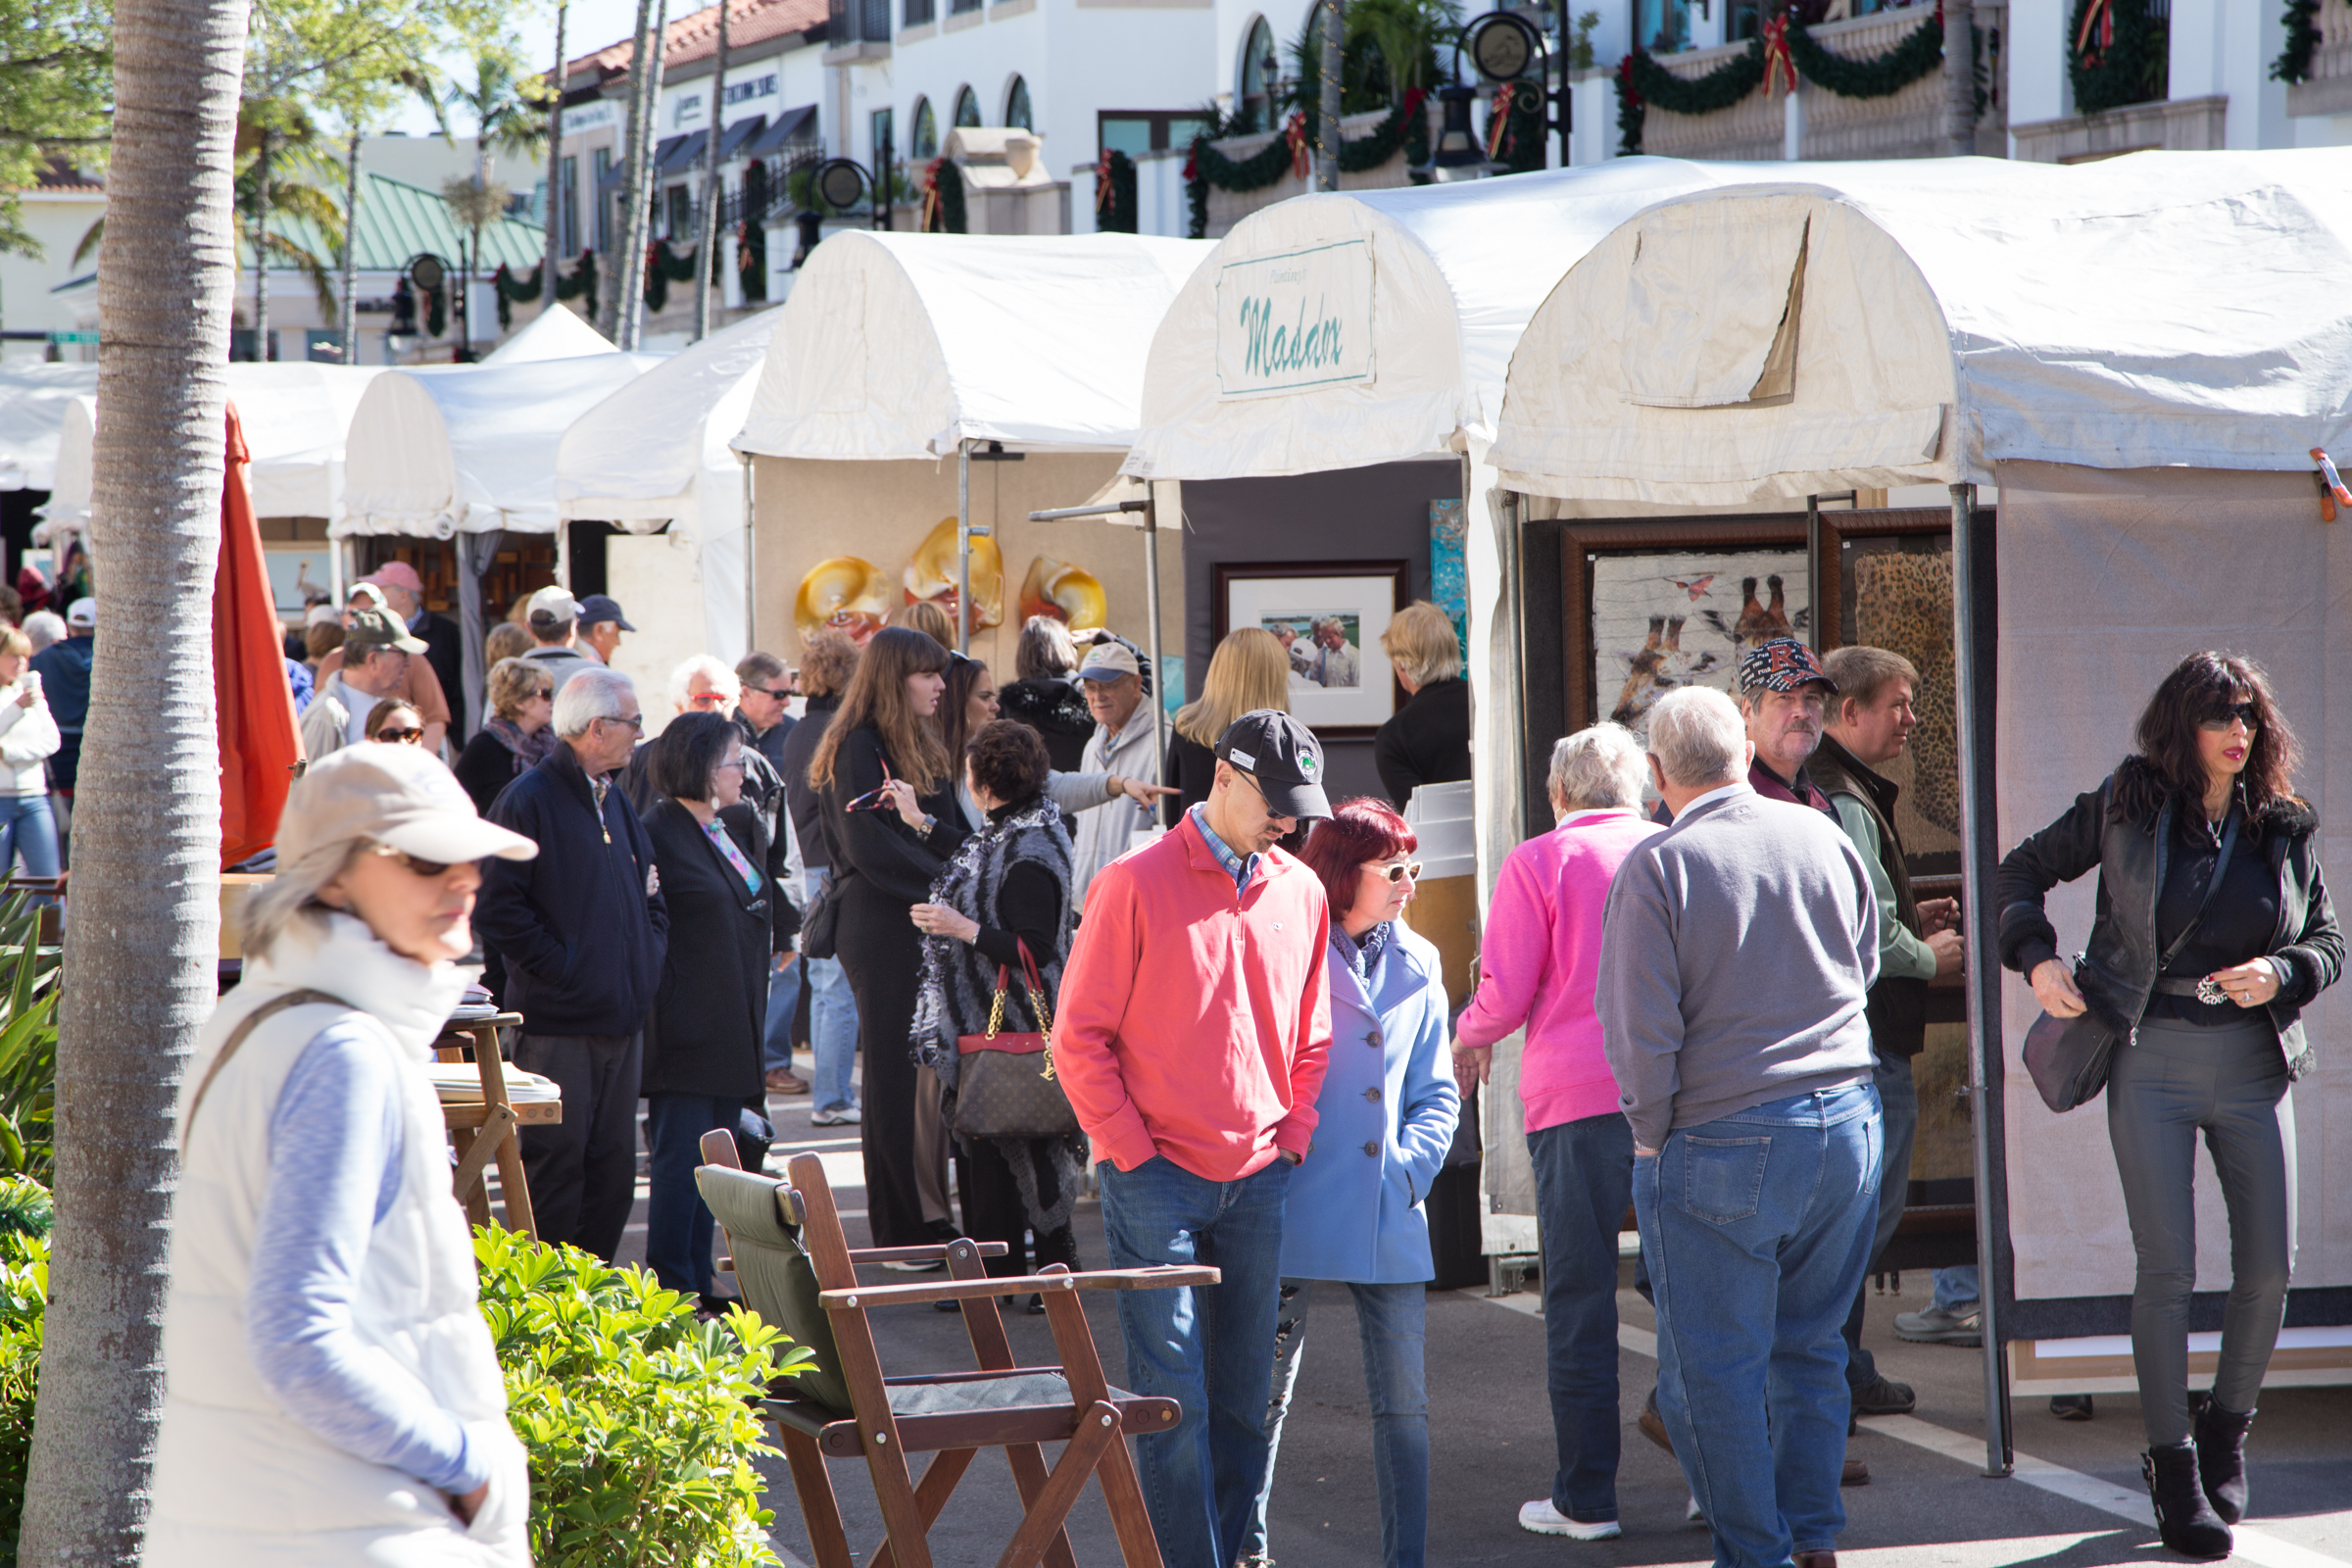 Attendees enjoy an outdoor art show, ranked as one of the nations' best, in Naples, Florida.